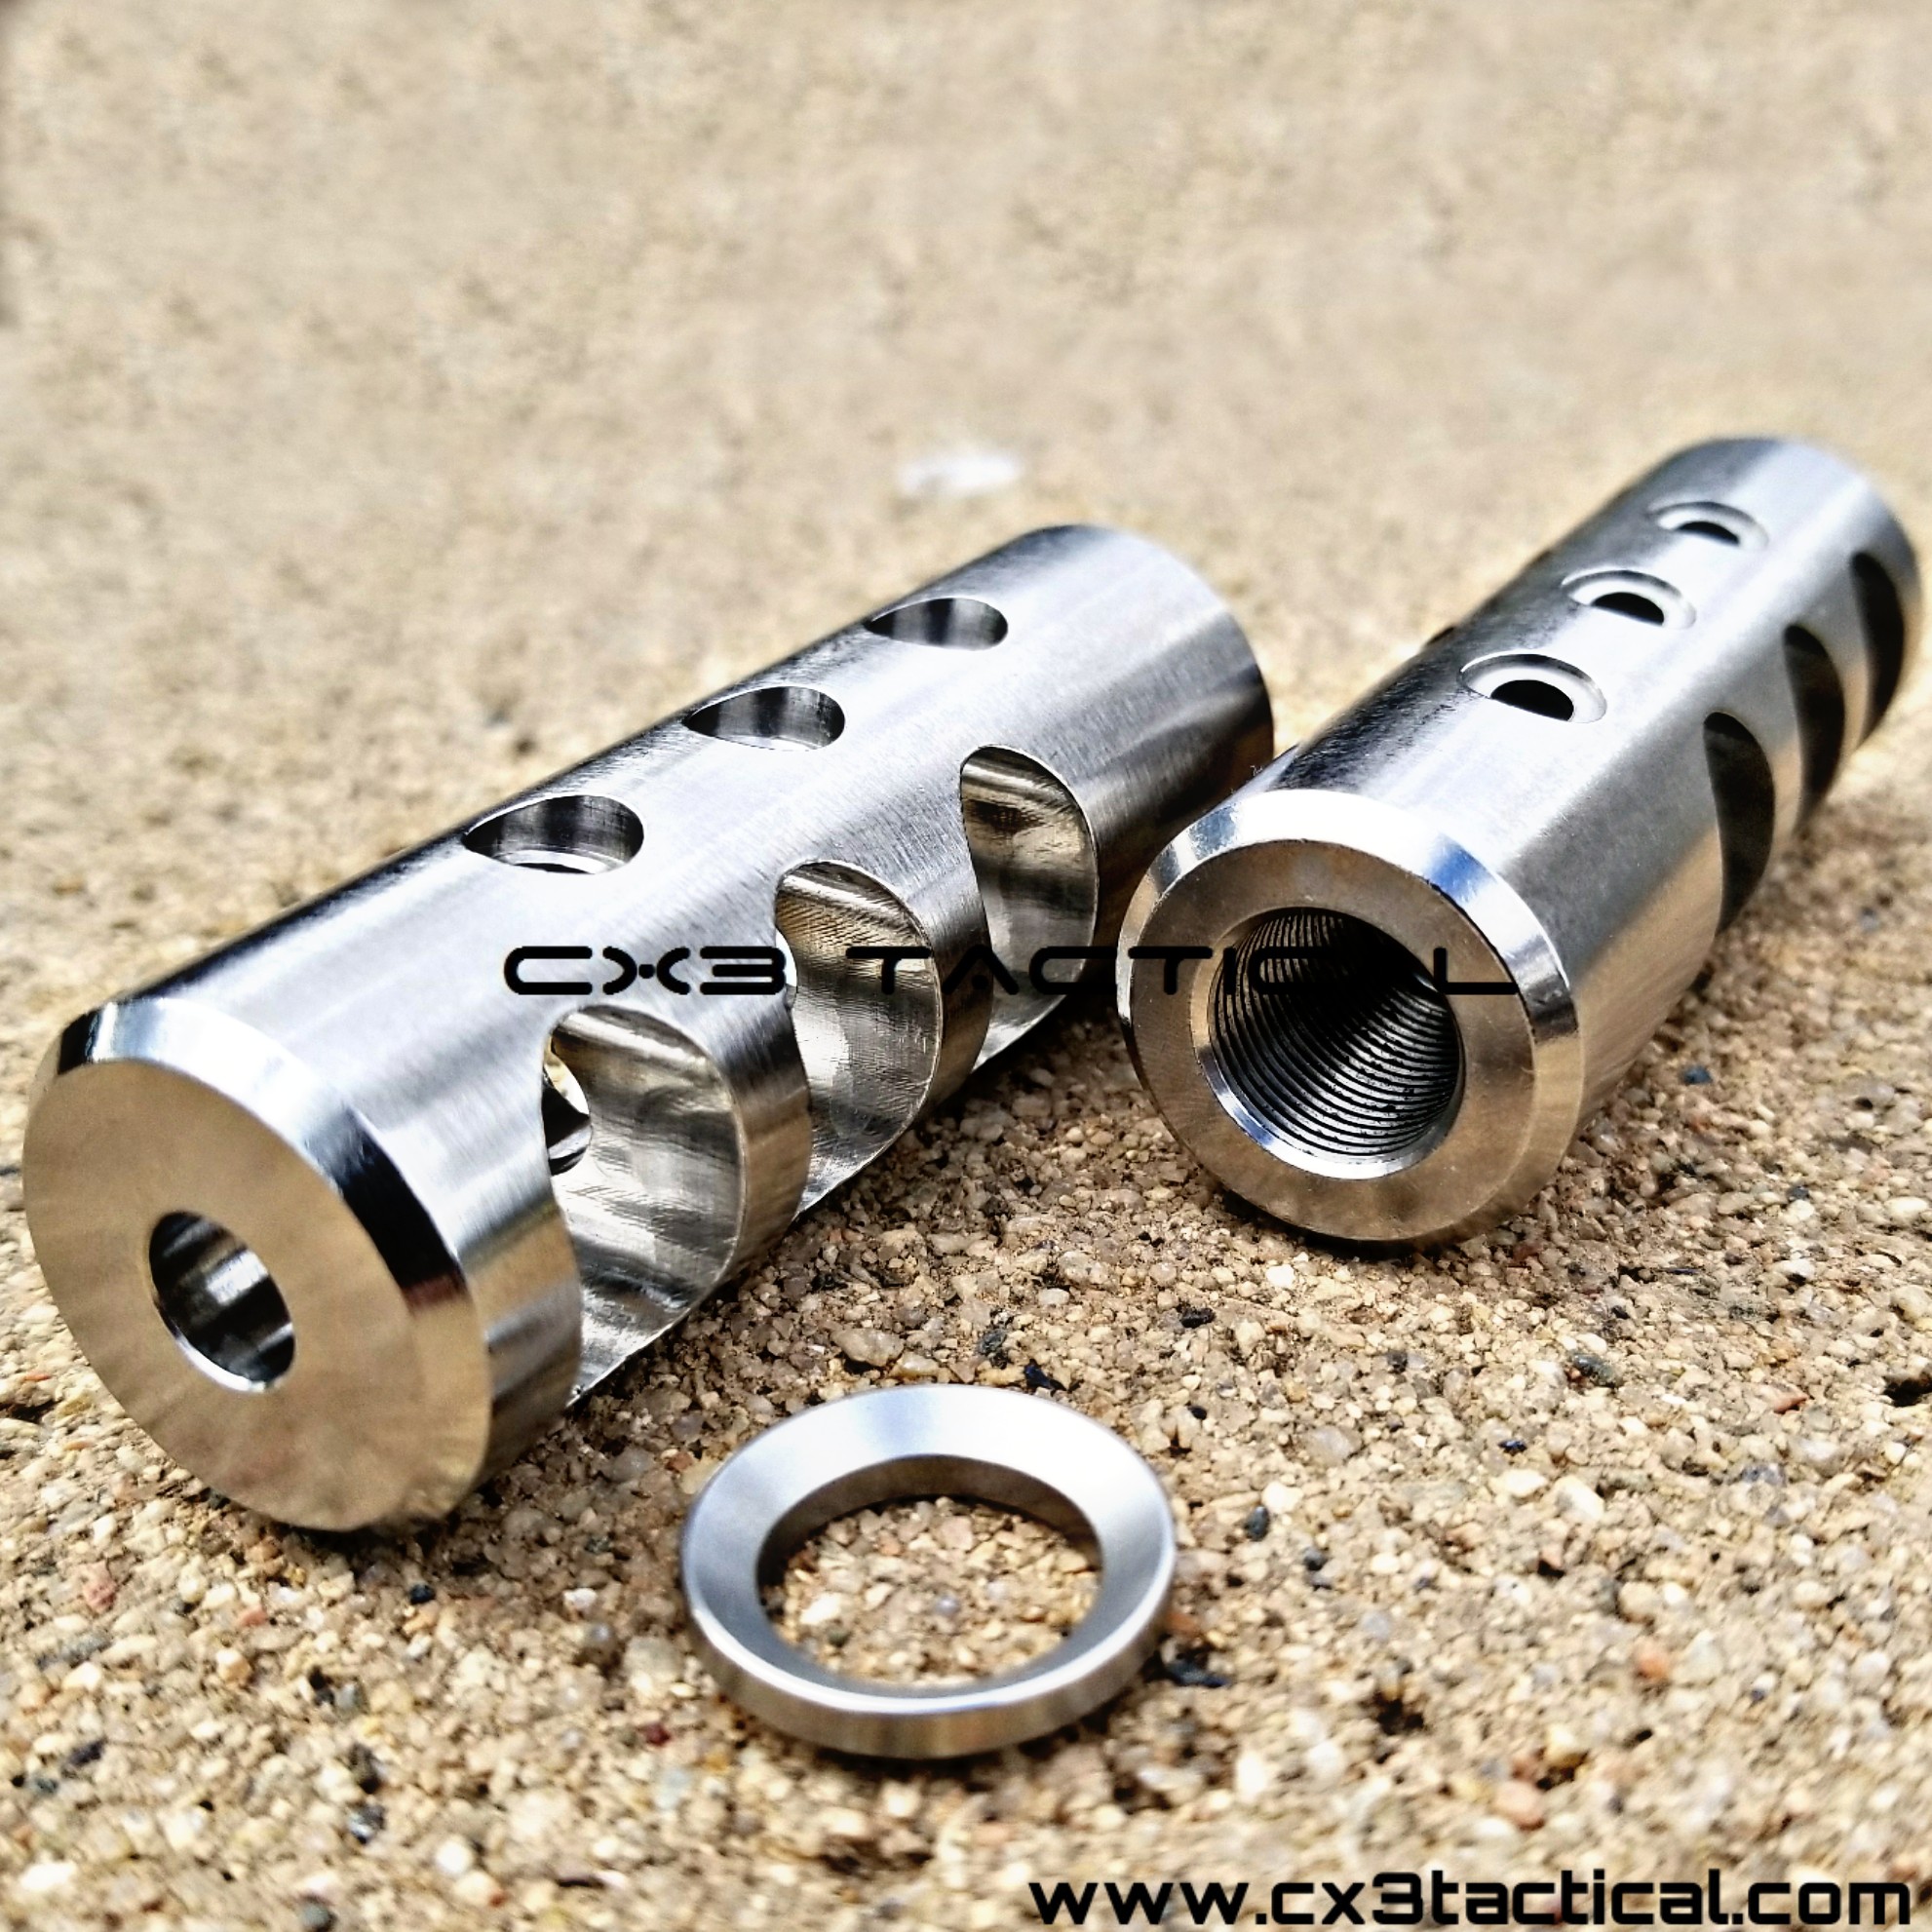 Stainless Steel 5/8x24 Thread 308 Short Competition Muzzle Brake Crush Washer 